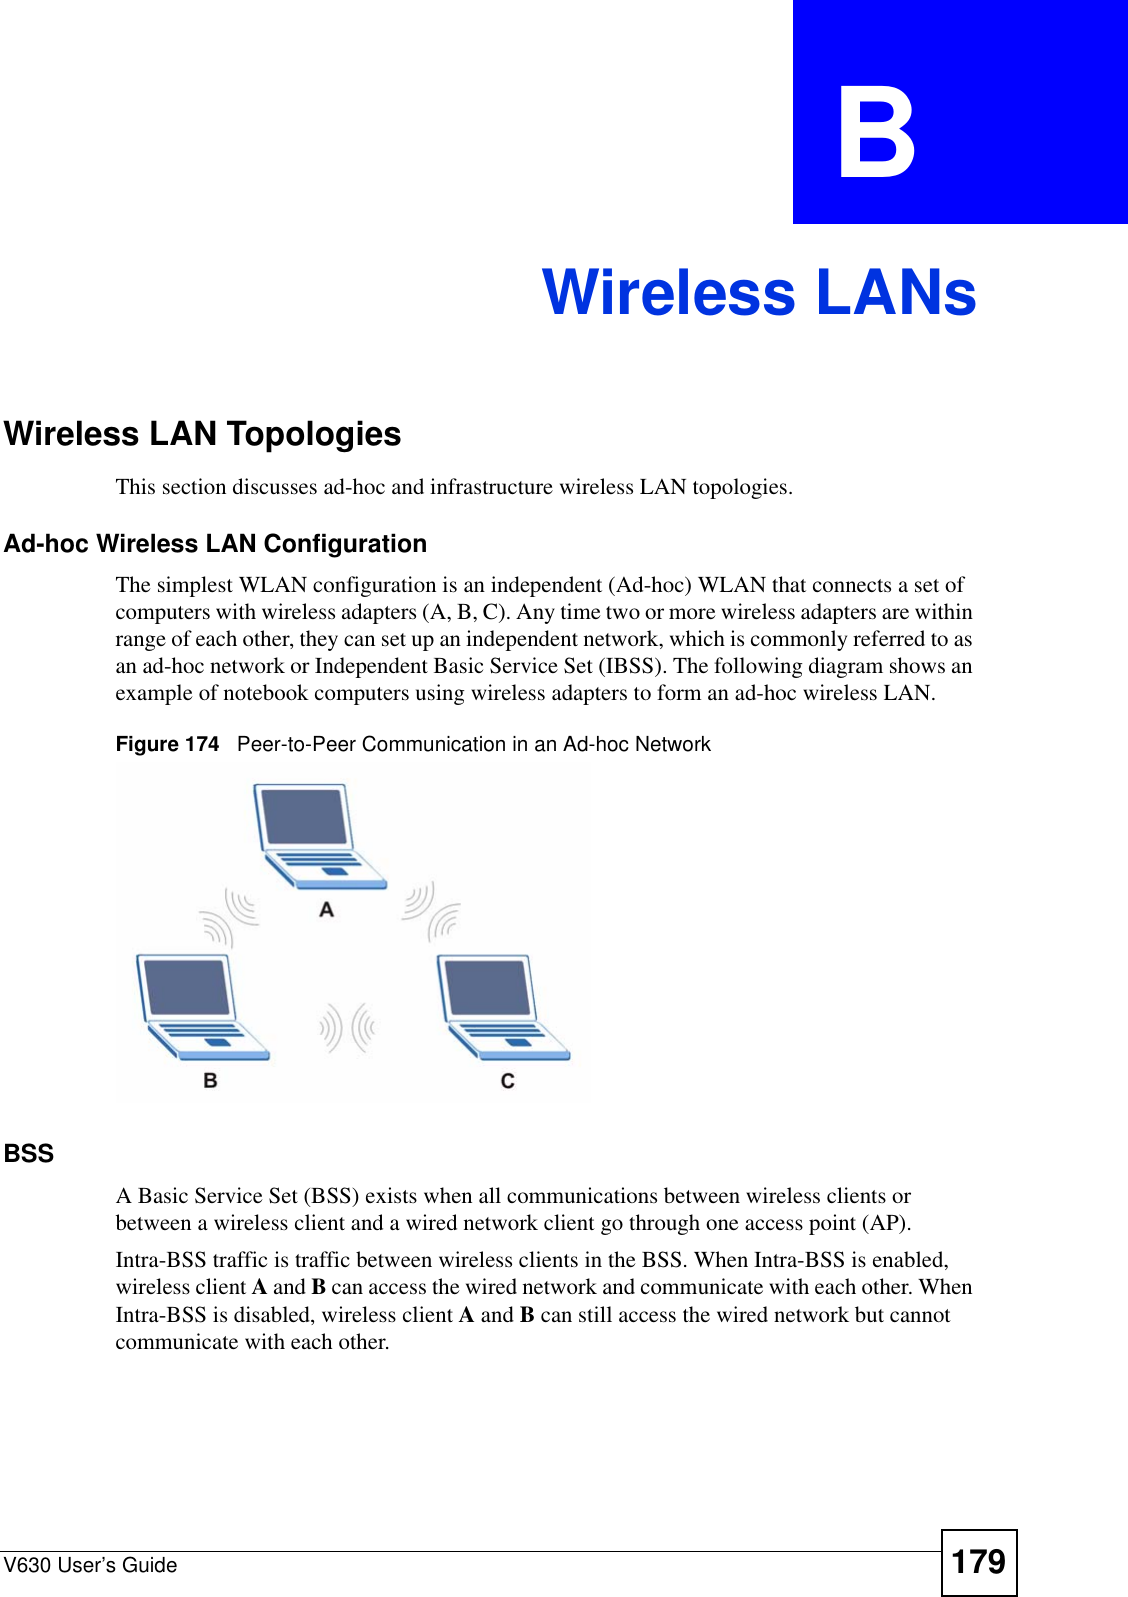 V630 User’s Guide 179APPENDIX  B Wireless LANsWireless LAN TopologiesThis section discusses ad-hoc and infrastructure wireless LAN topologies.Ad-hoc Wireless LAN ConfigurationThe simplest WLAN configuration is an independent (Ad-hoc) WLAN that connects a set of computers with wireless adapters (A, B, C). Any time two or more wireless adapters are within range of each other, they can set up an independent network, which is commonly referred to as an ad-hoc network or Independent Basic Service Set (IBSS). The following diagram shows an example of notebook computers using wireless adapters to form an ad-hoc wireless LAN. Figure 174   Peer-to-Peer Communication in an Ad-hoc NetworkBSSA Basic Service Set (BSS) exists when all communications between wireless clients or between a wireless client and a wired network client go through one access point (AP). Intra-BSS traffic is traffic between wireless clients in the BSS. When Intra-BSS is enabled, wireless client A and B can access the wired network and communicate with each other. When Intra-BSS is disabled, wireless client A and B can still access the wired network but cannot communicate with each other.